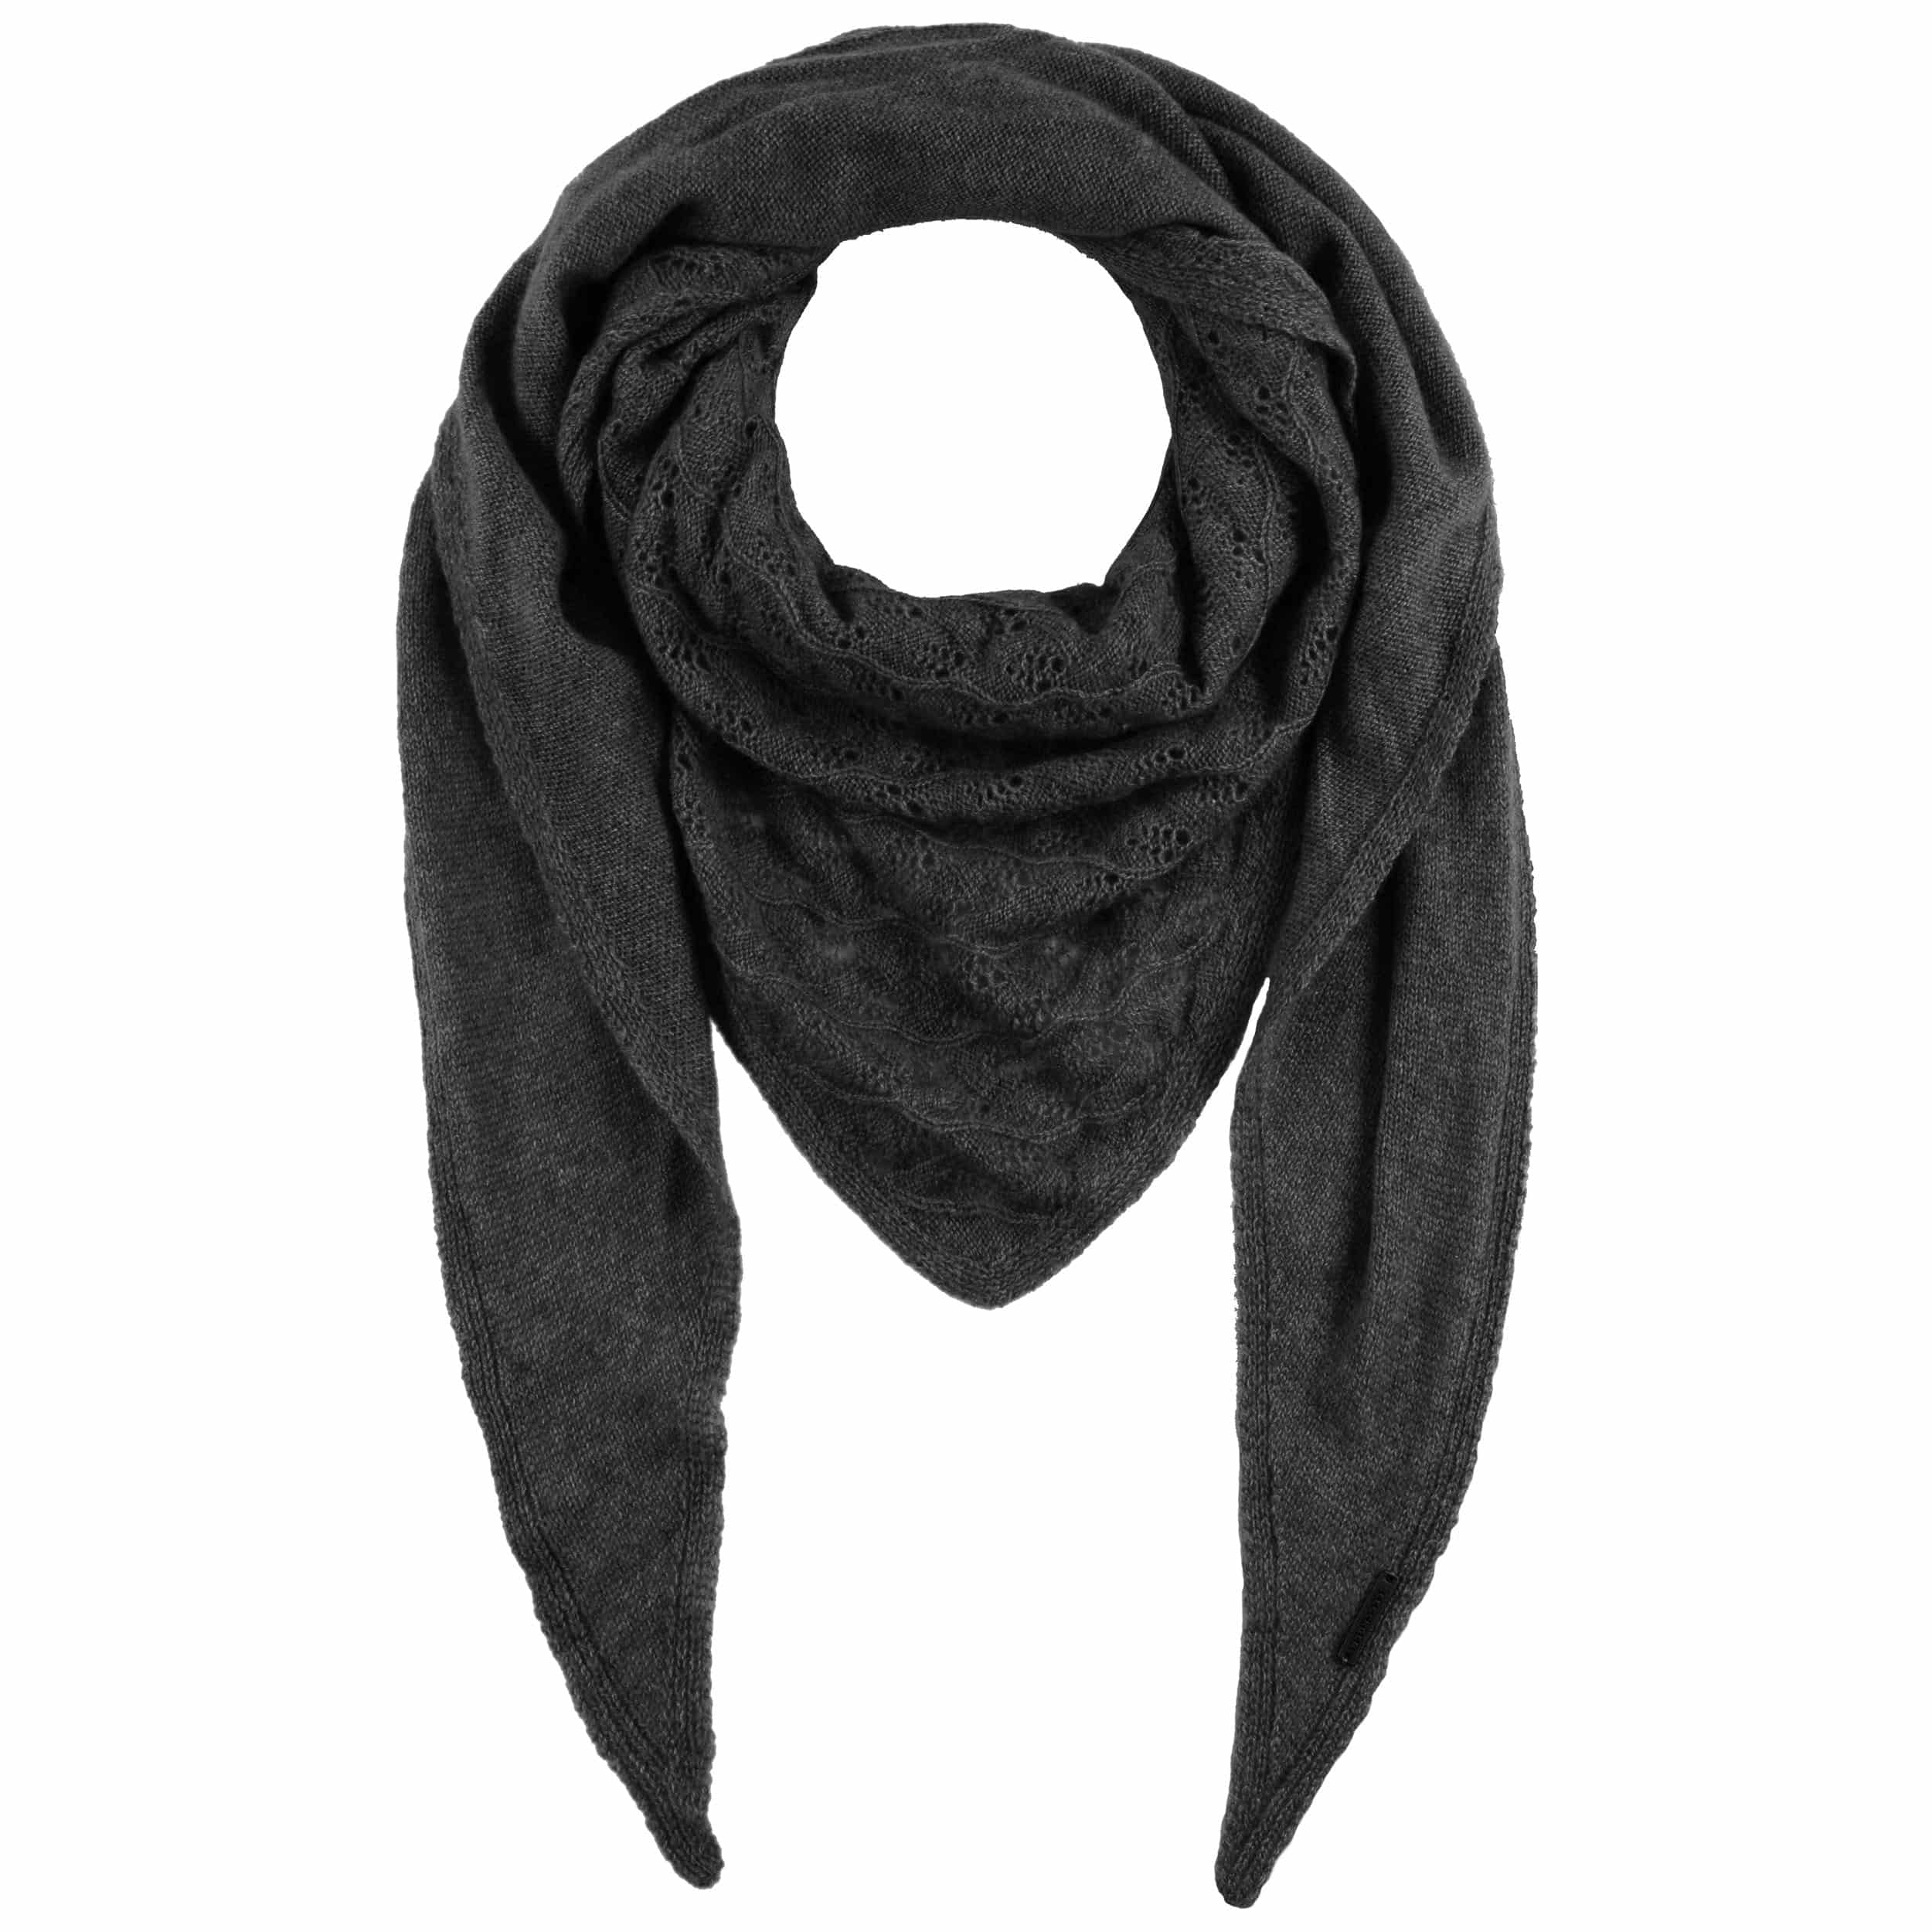 CashmereTriangle Scarf by Seeberger - 123,95